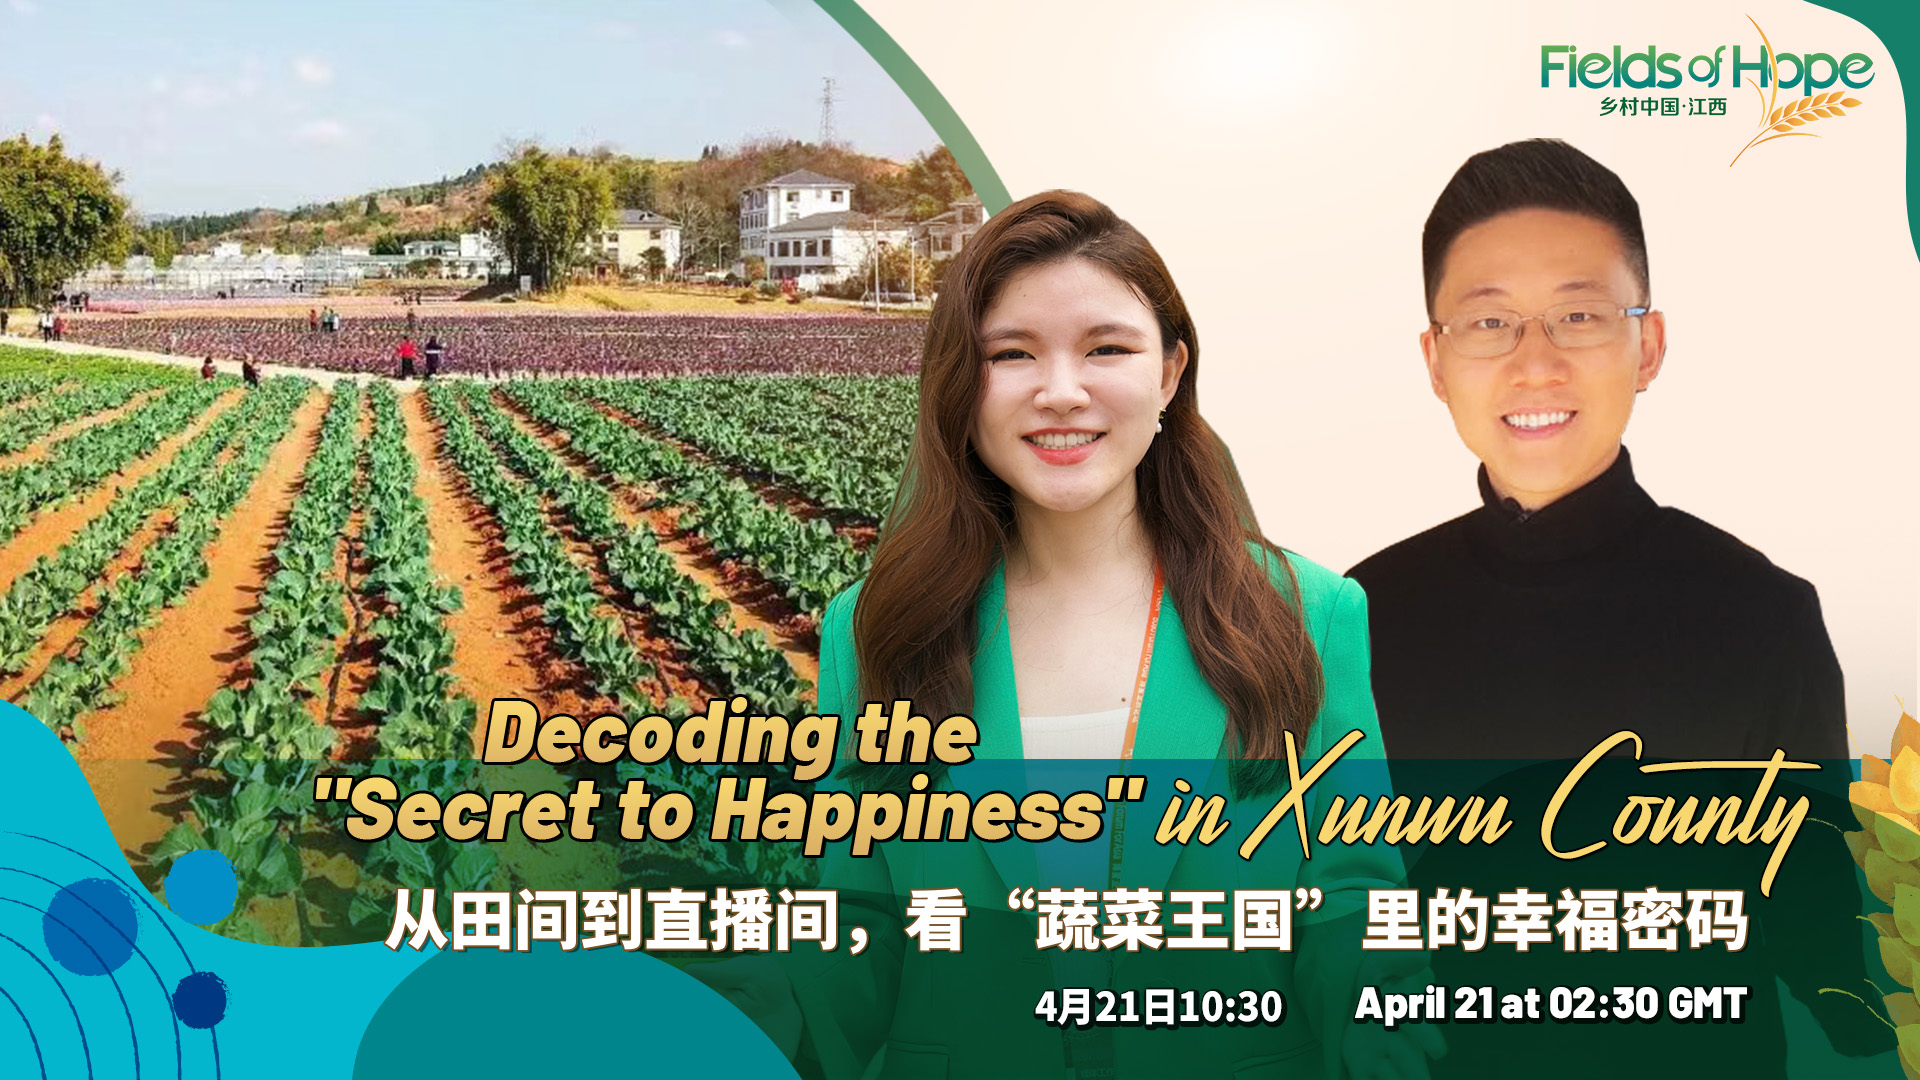 Live: Decoding the 'secret to happiness' in Xunwu County